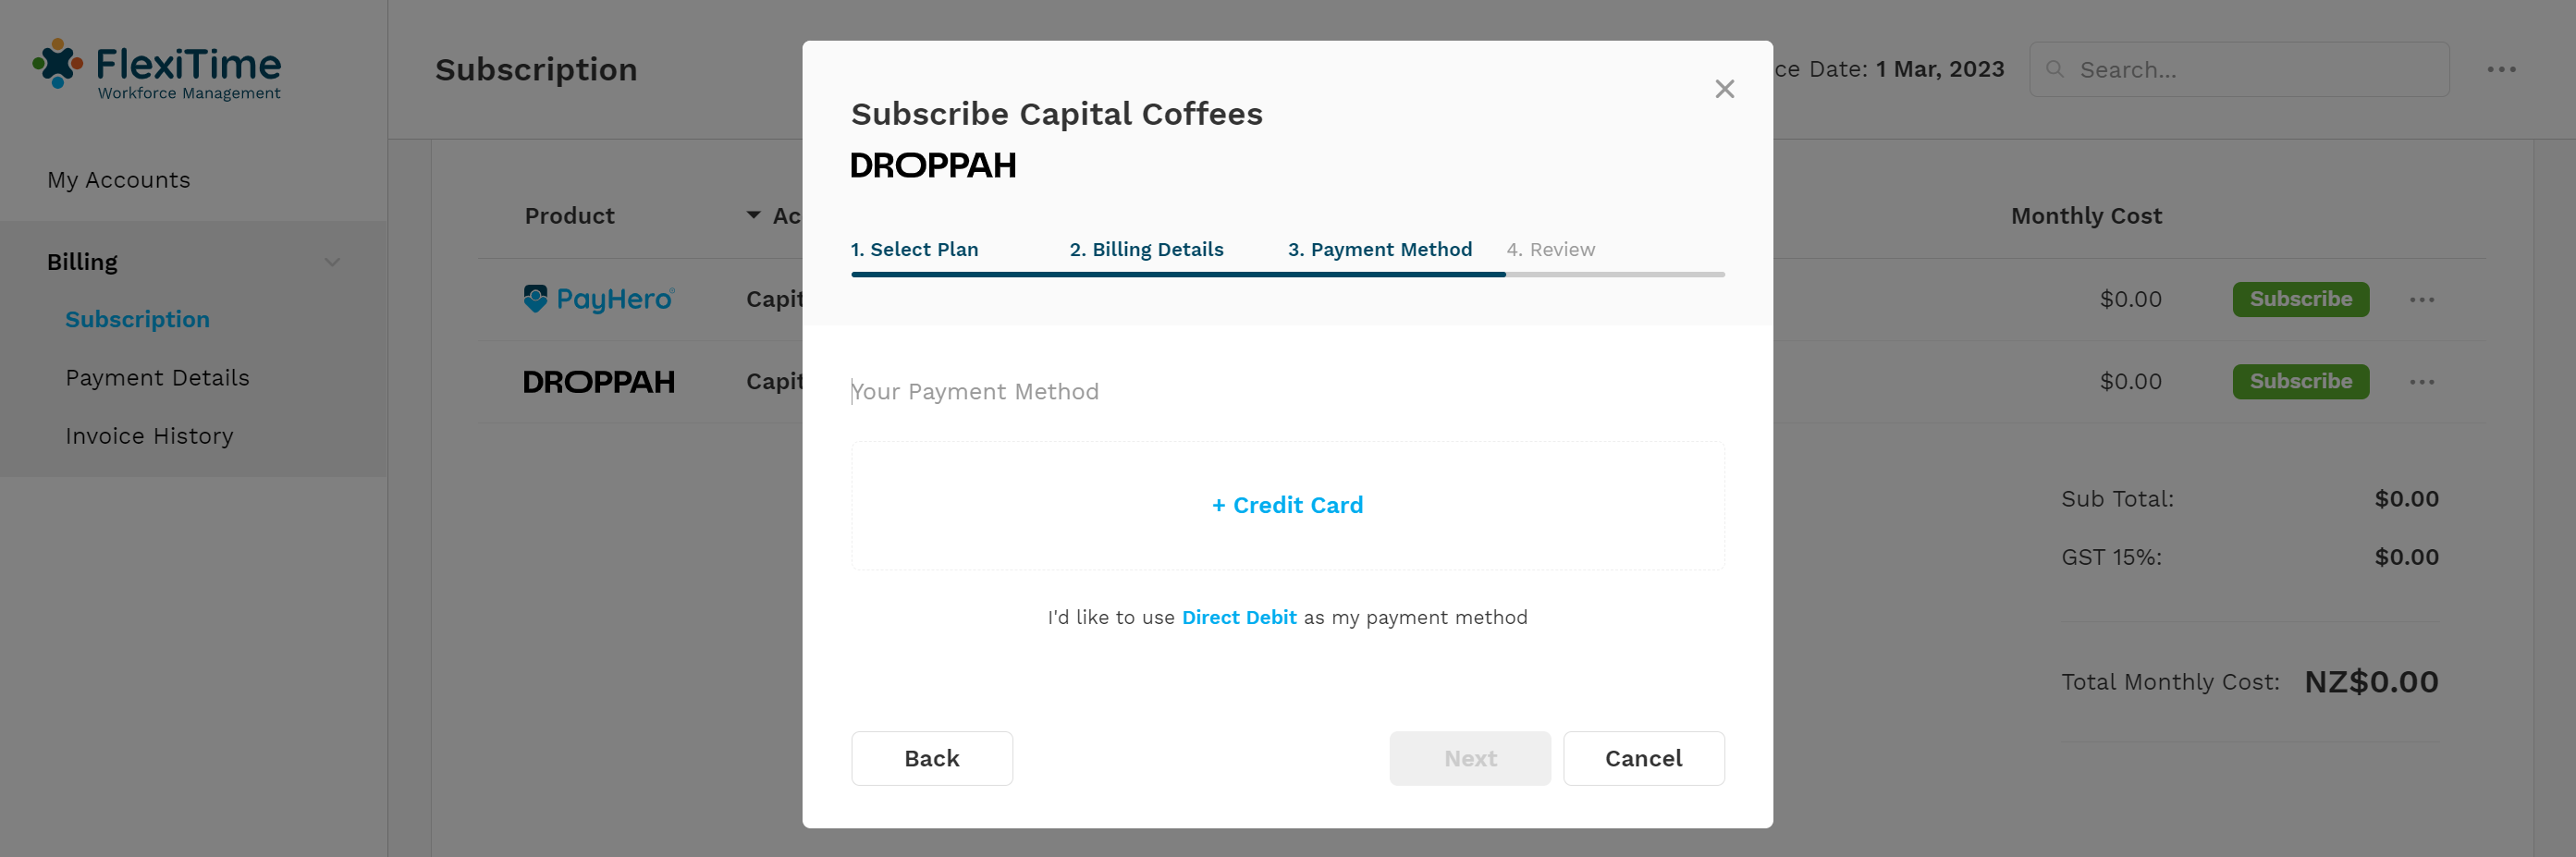 Managing_Droppah_Subscription_-_Payment_Method.png